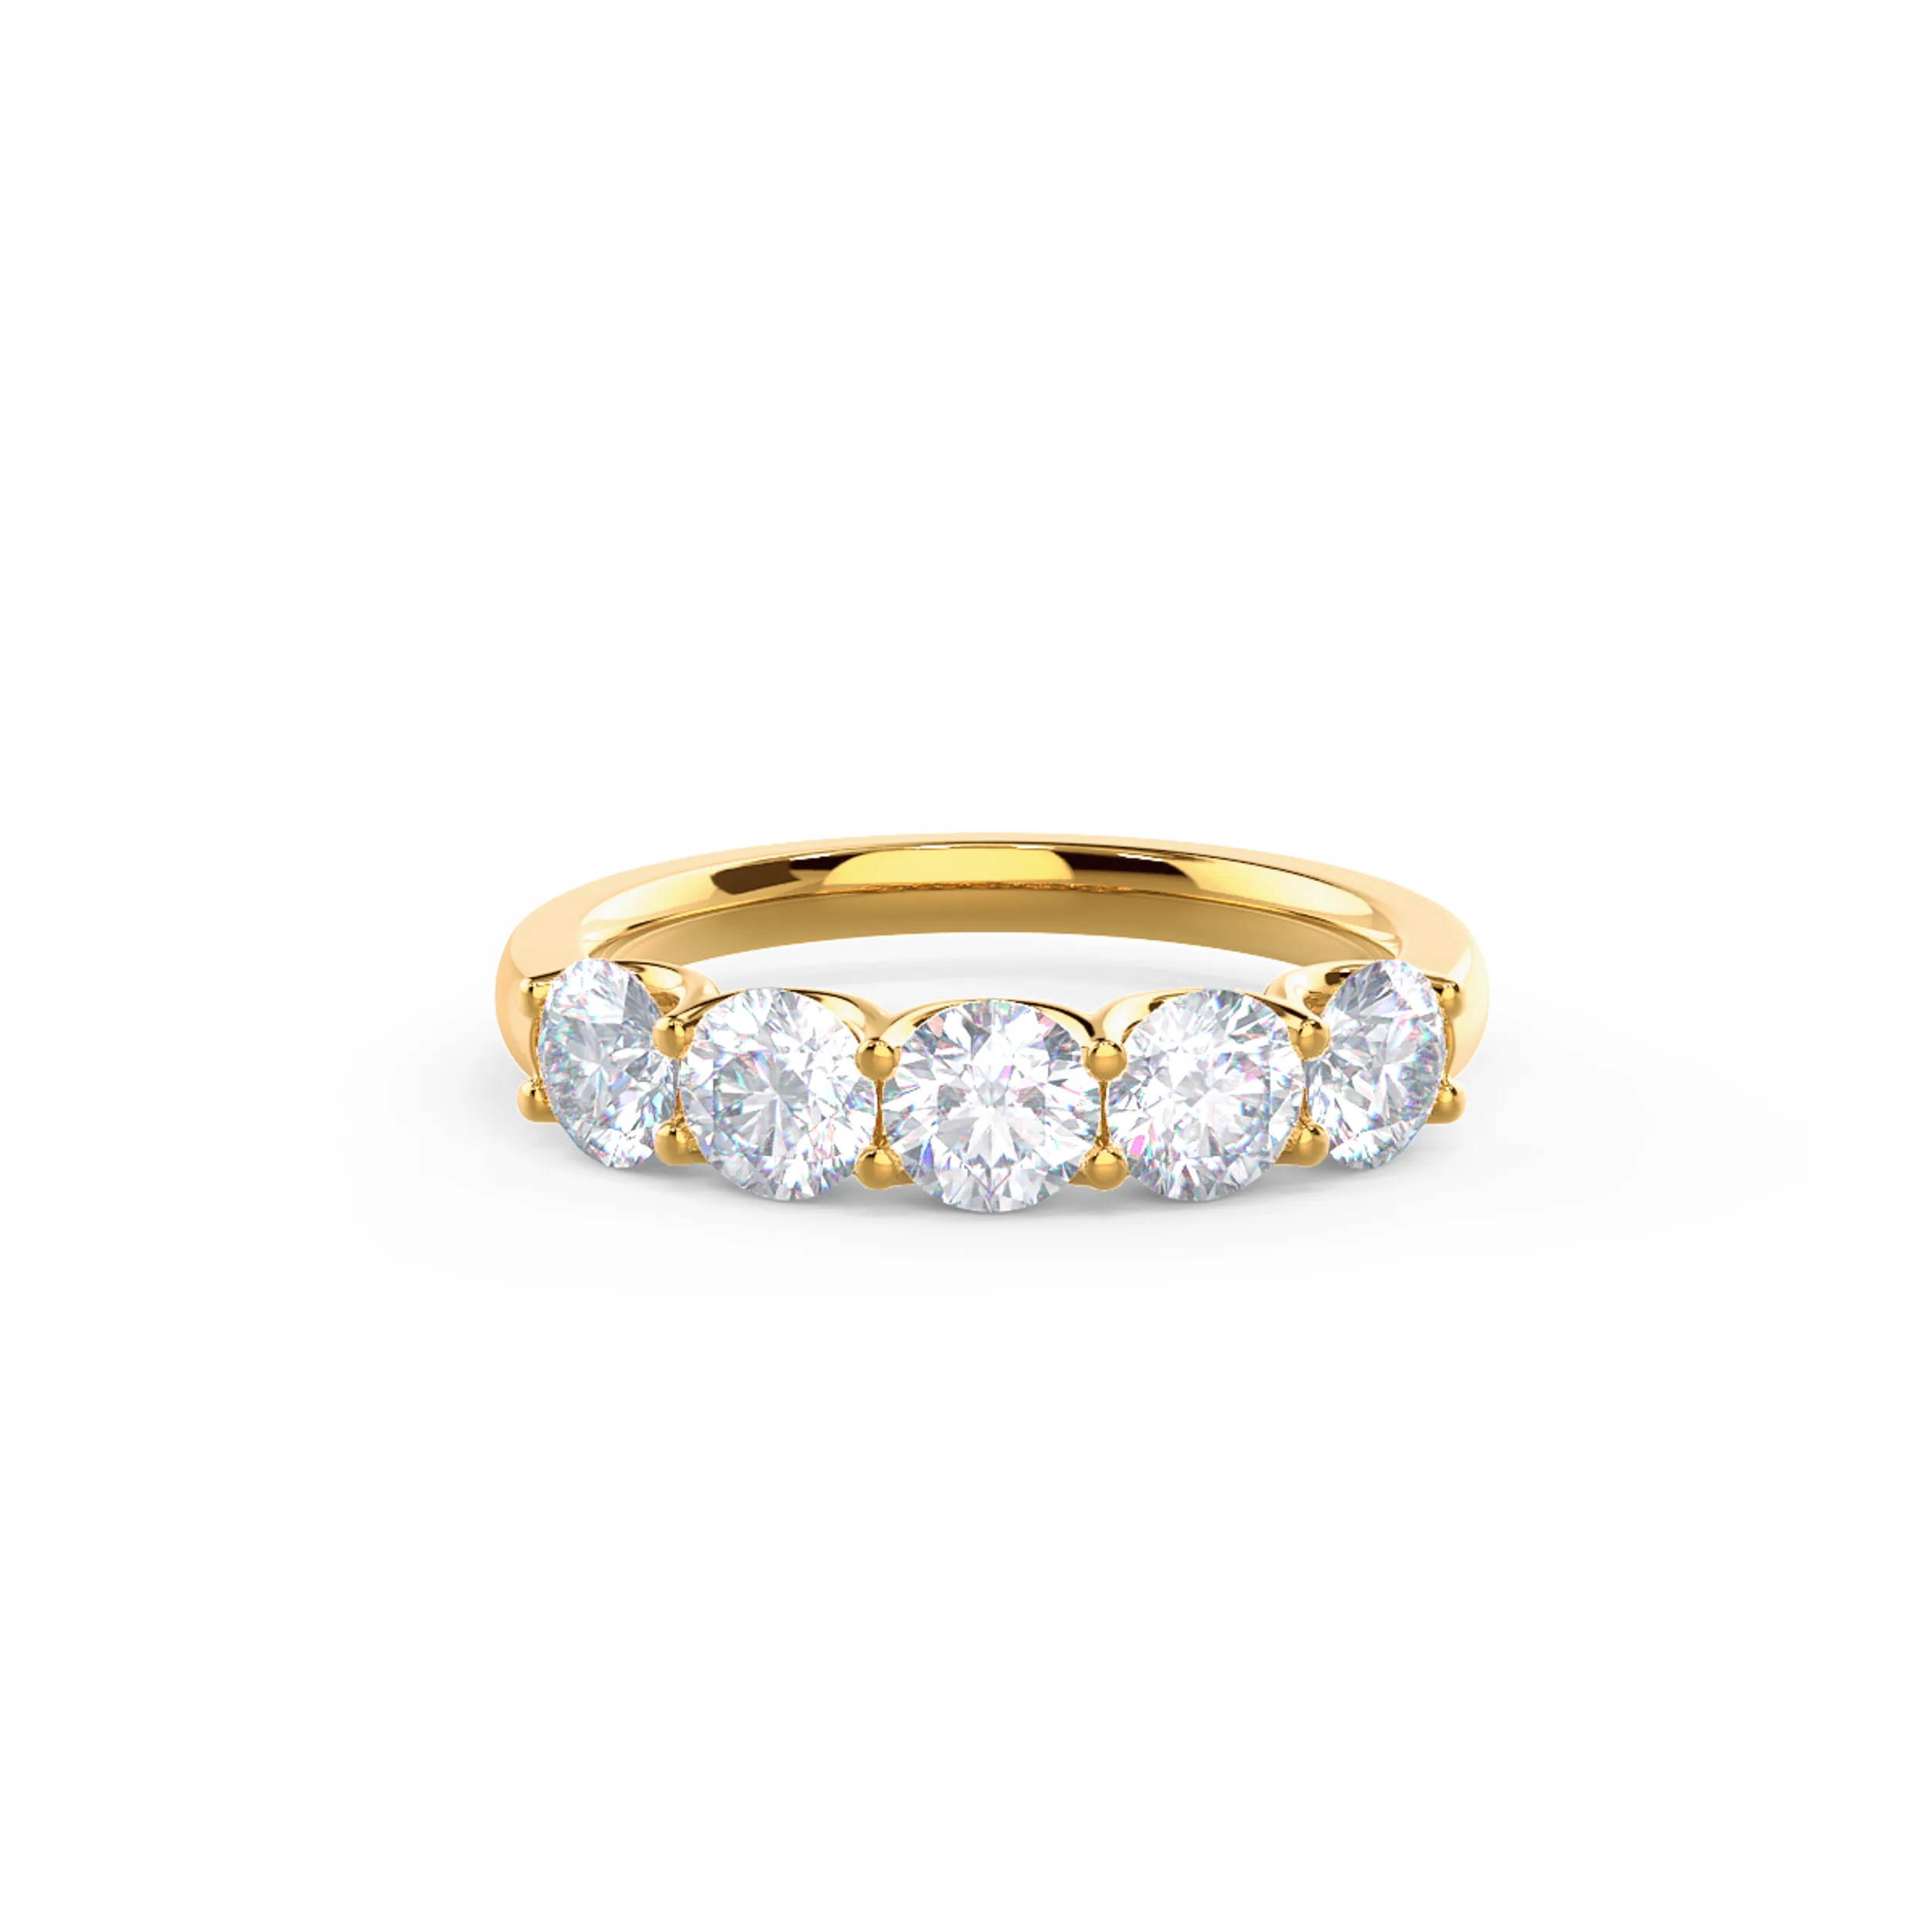 Hand Selected 1.5 Carat Round Brilliant Lab Grown Diamonds French U Five Stone in 14k Yellow Gold (Main View)